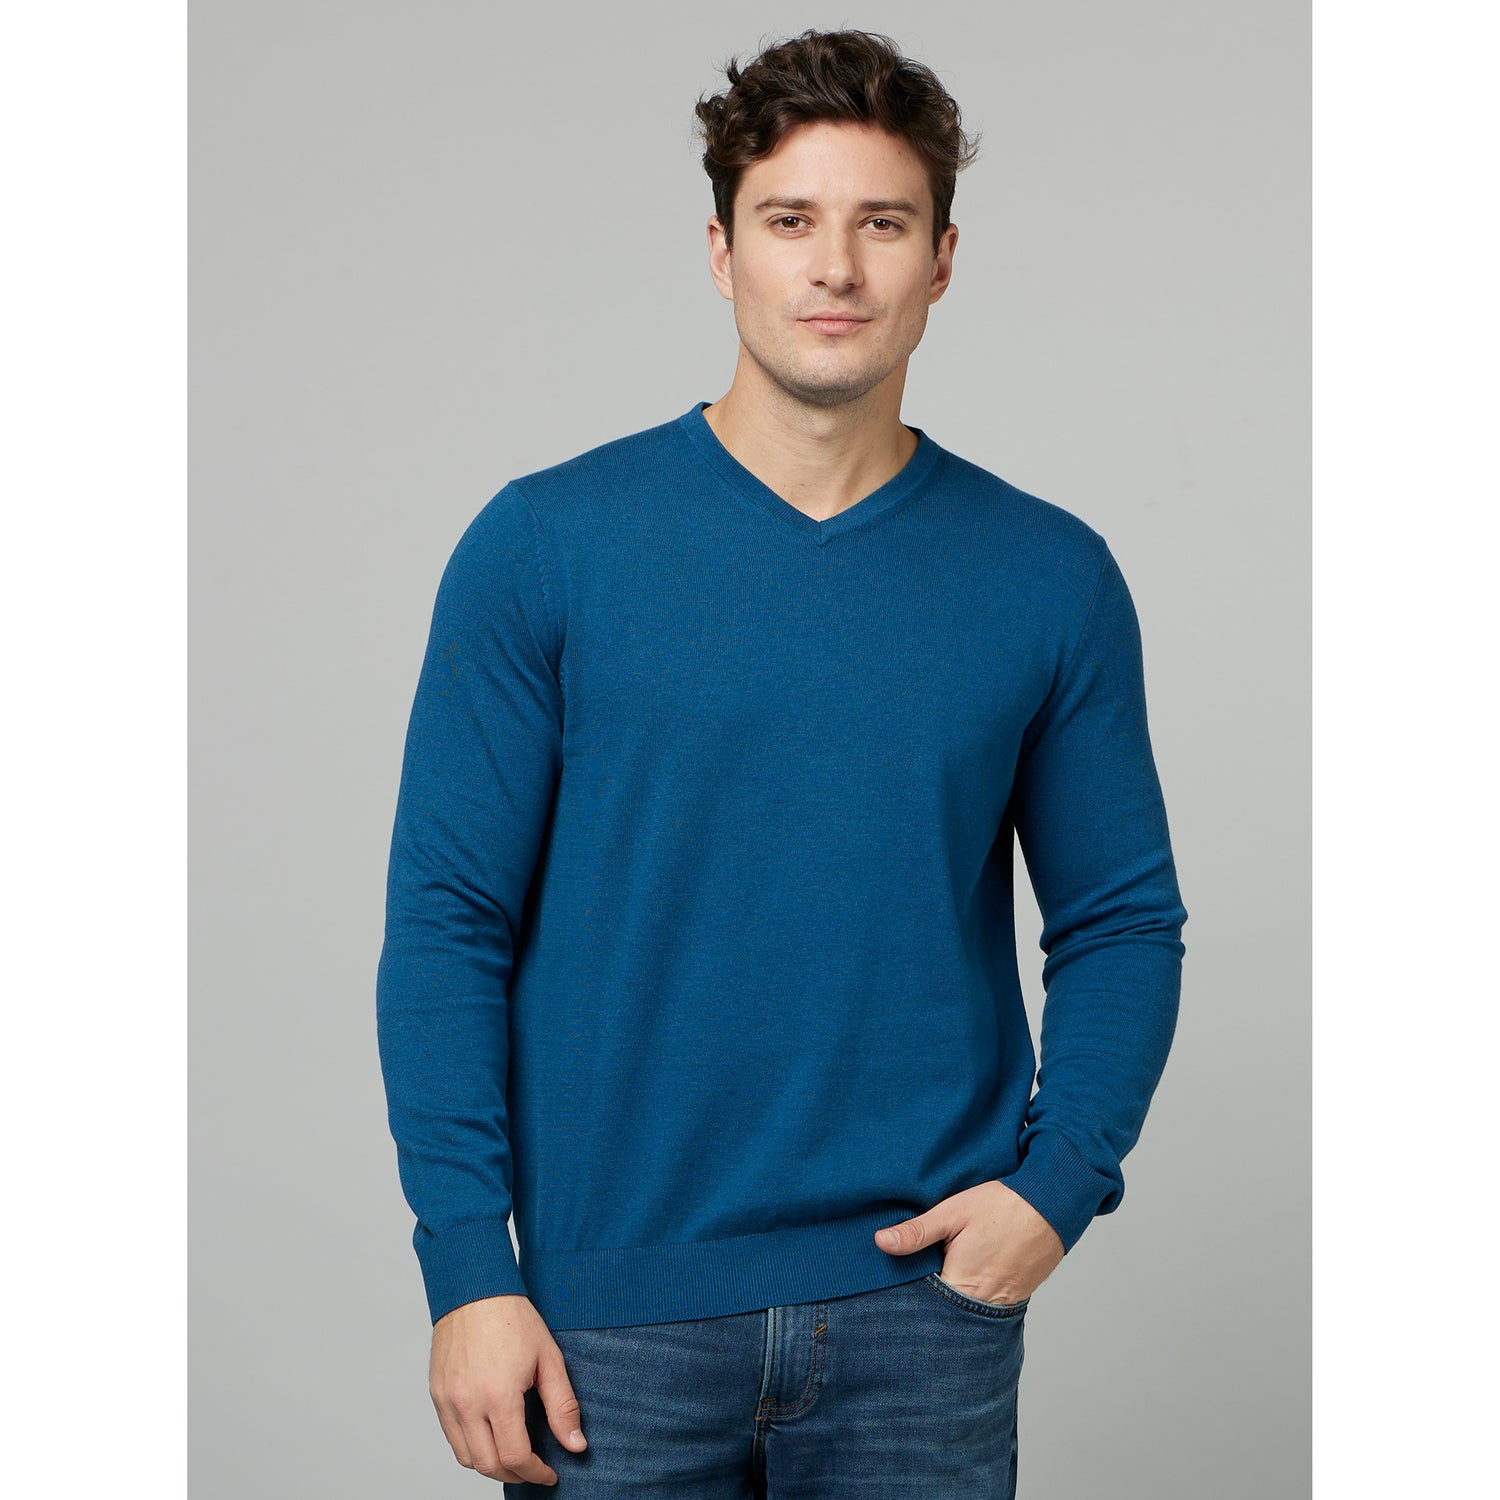 Blue Solid V-Neck Long Sleeve Cotton Pullover Sweater (DECOTONVIN)